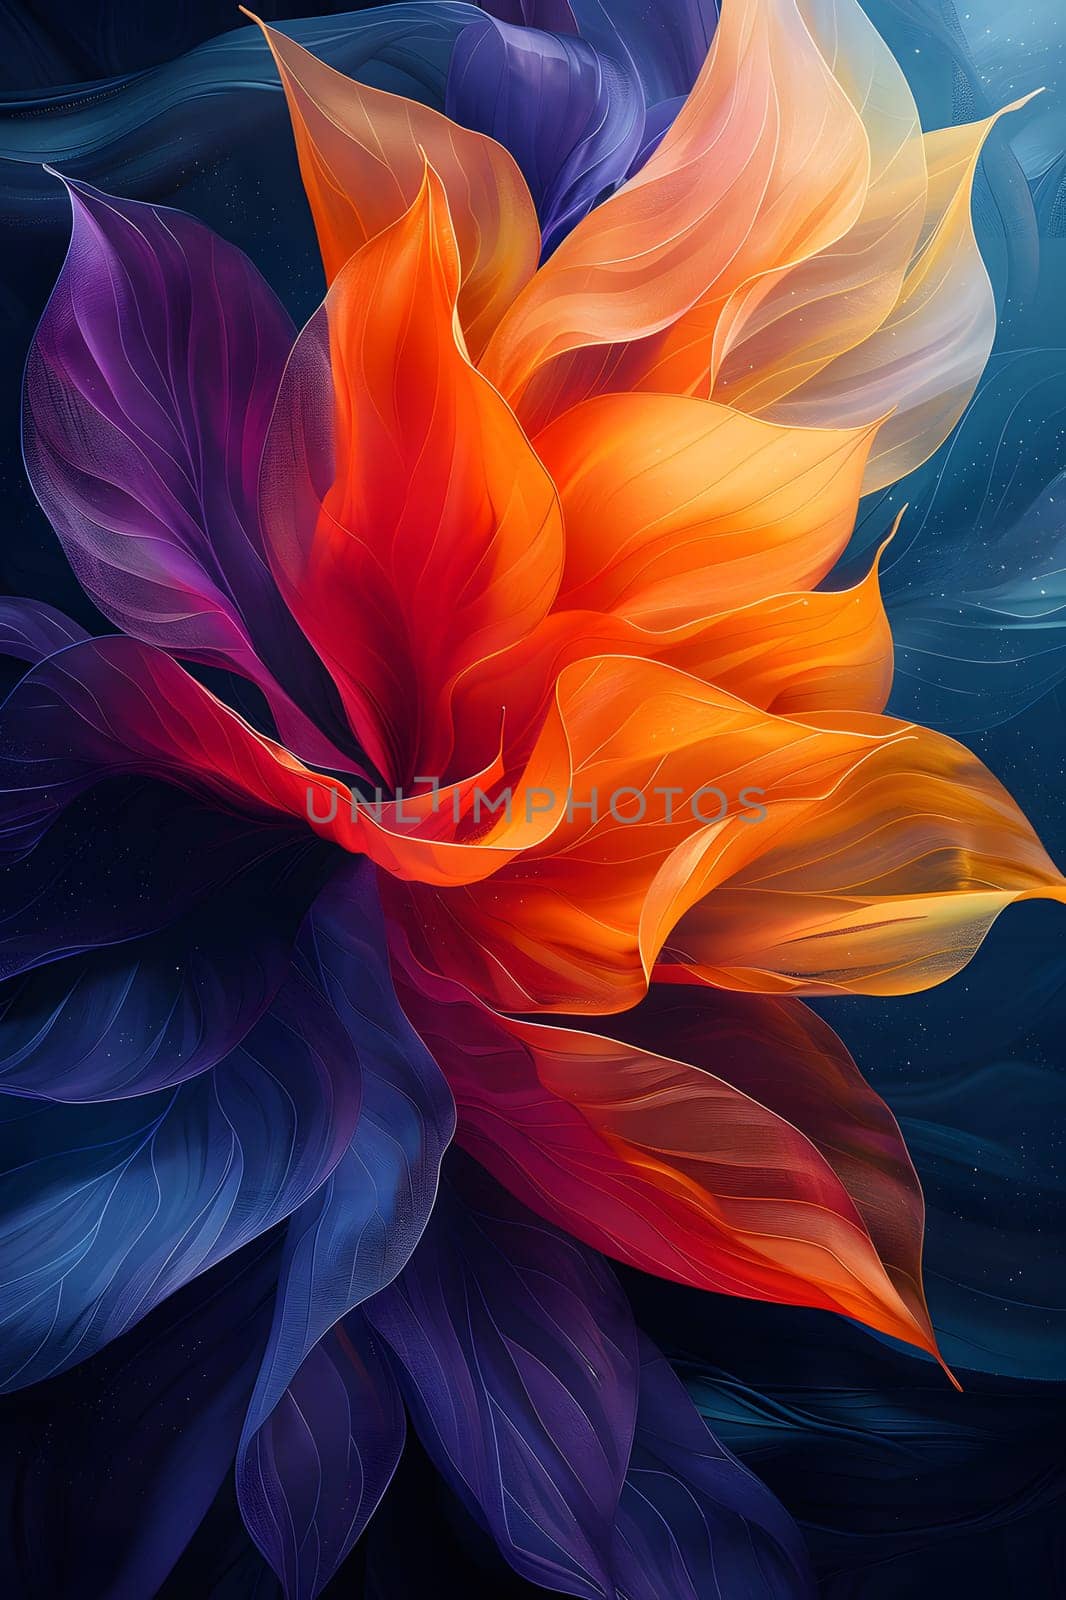 A closeup of a vibrant orange flower with delicate petals against a dark background, creating a striking contrast in the natural landscape